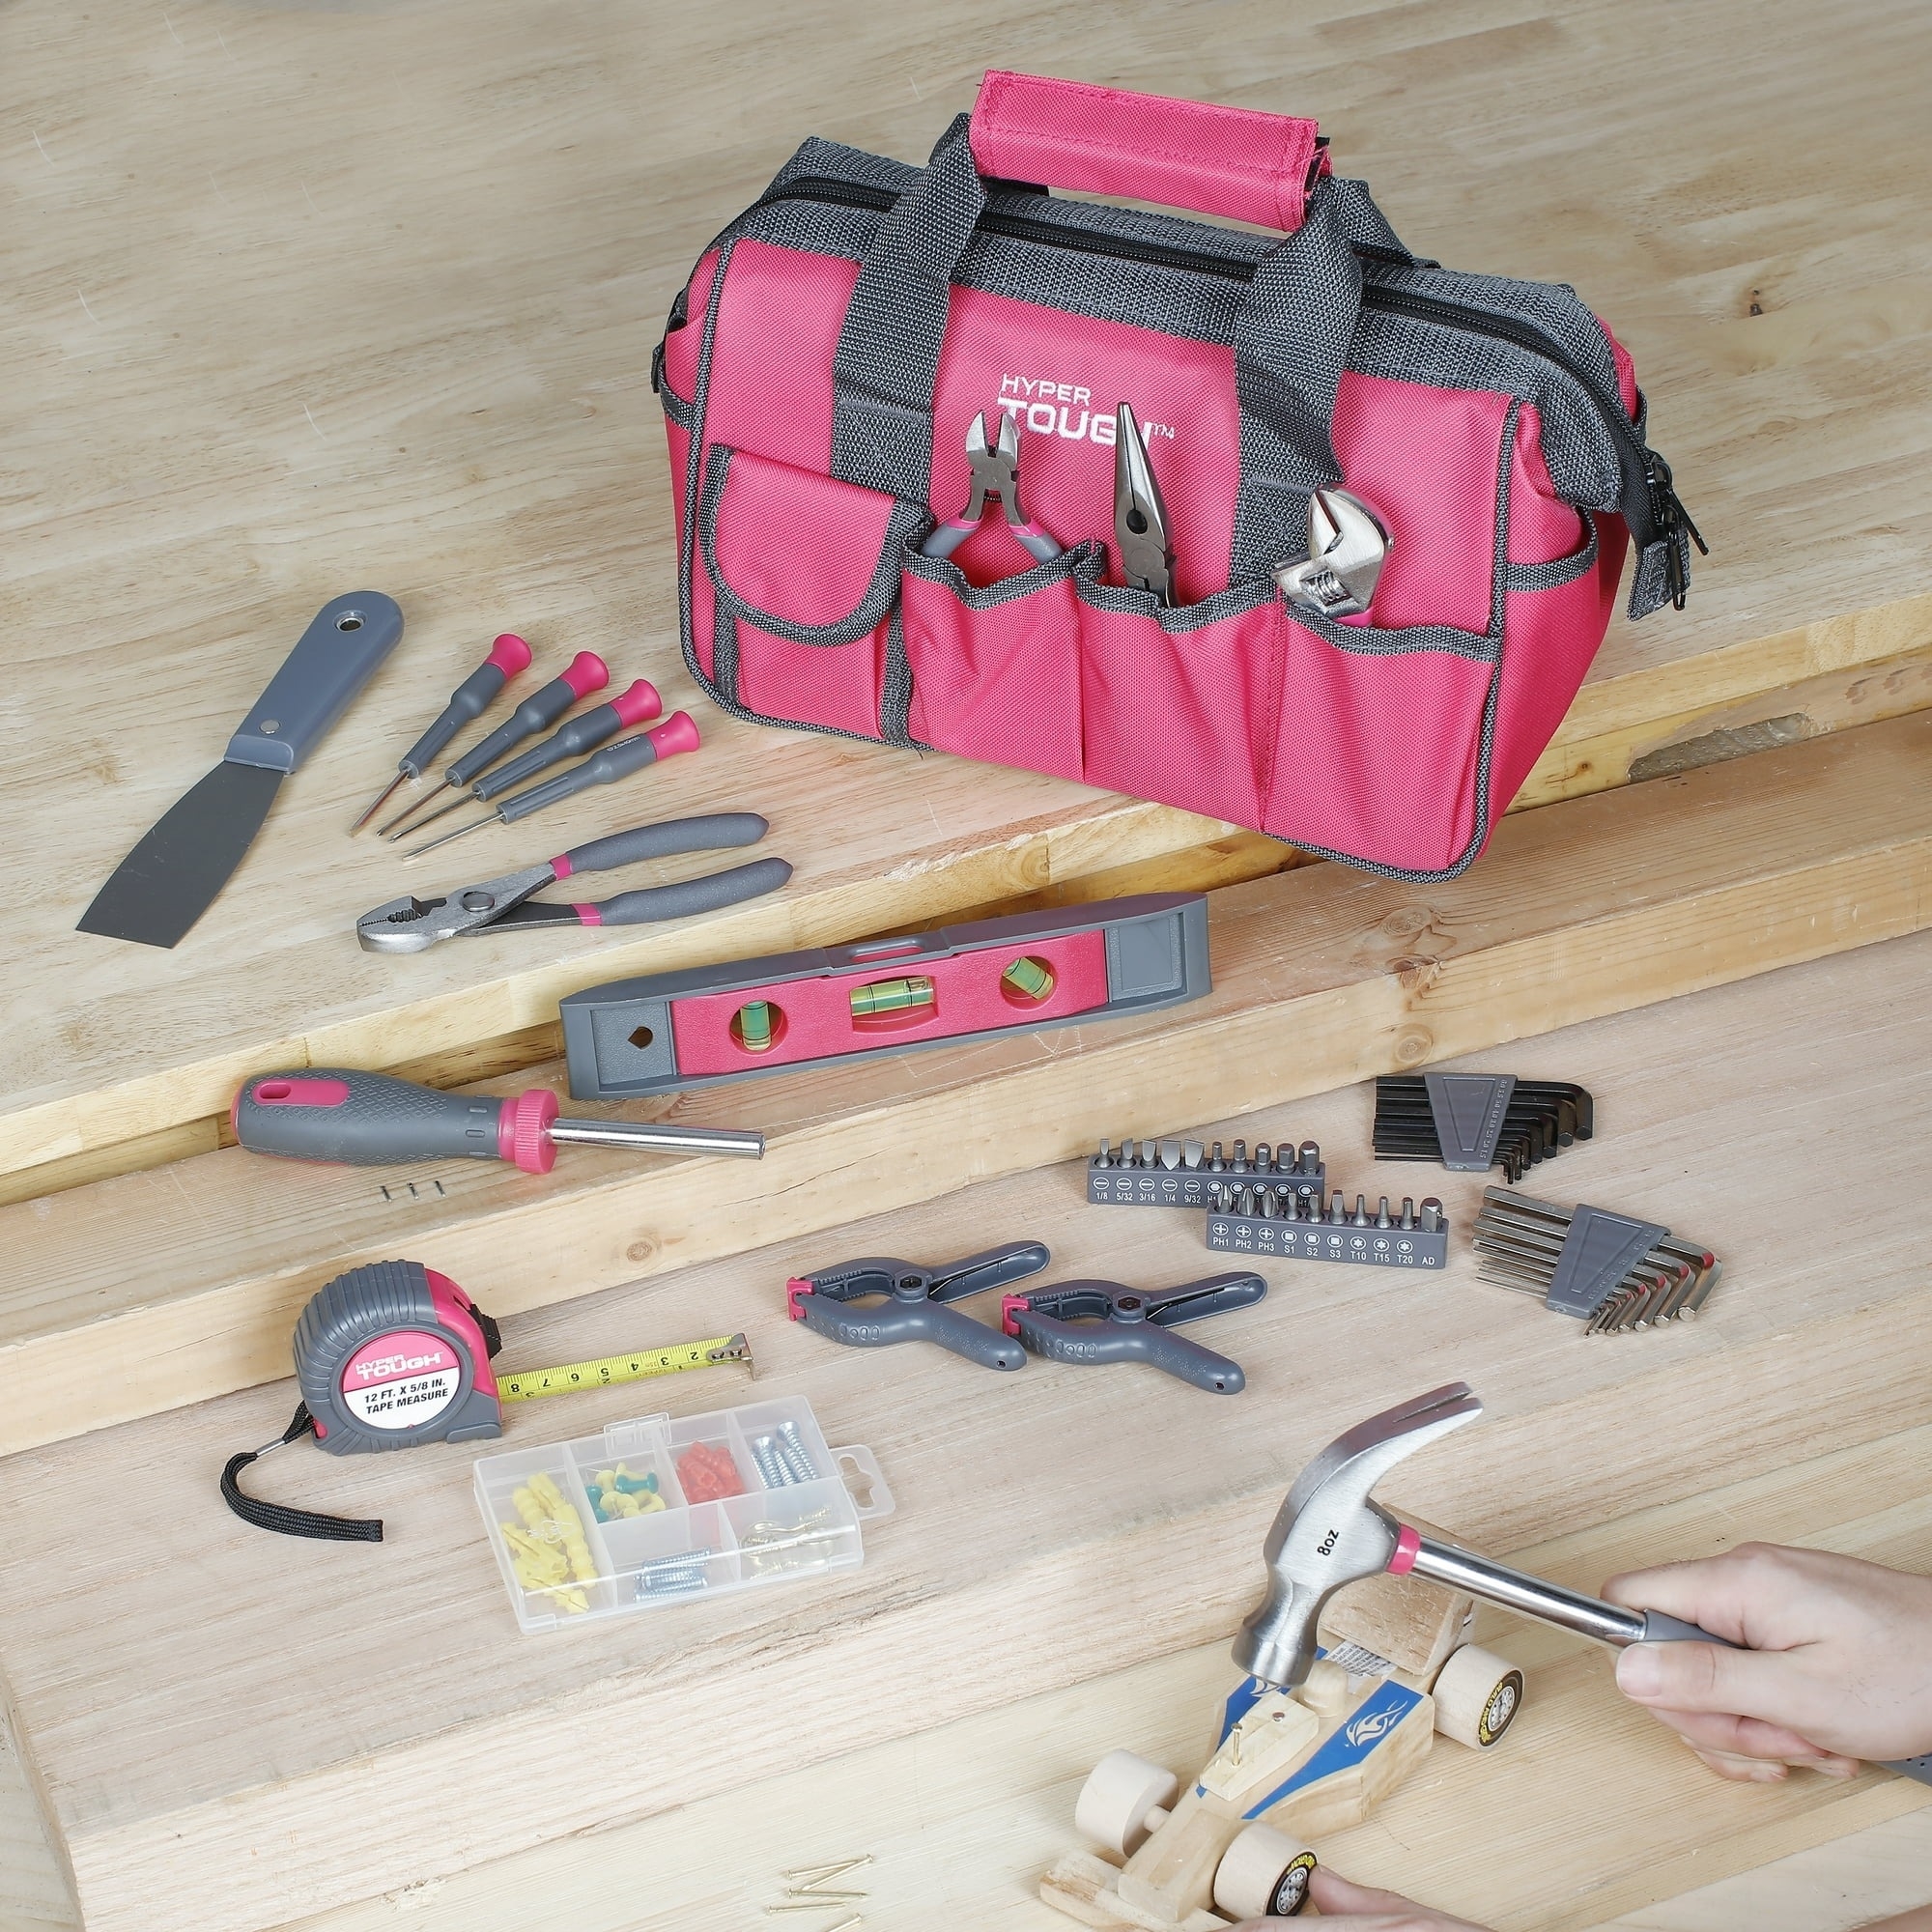 the 89-piece pink and gray tool kit